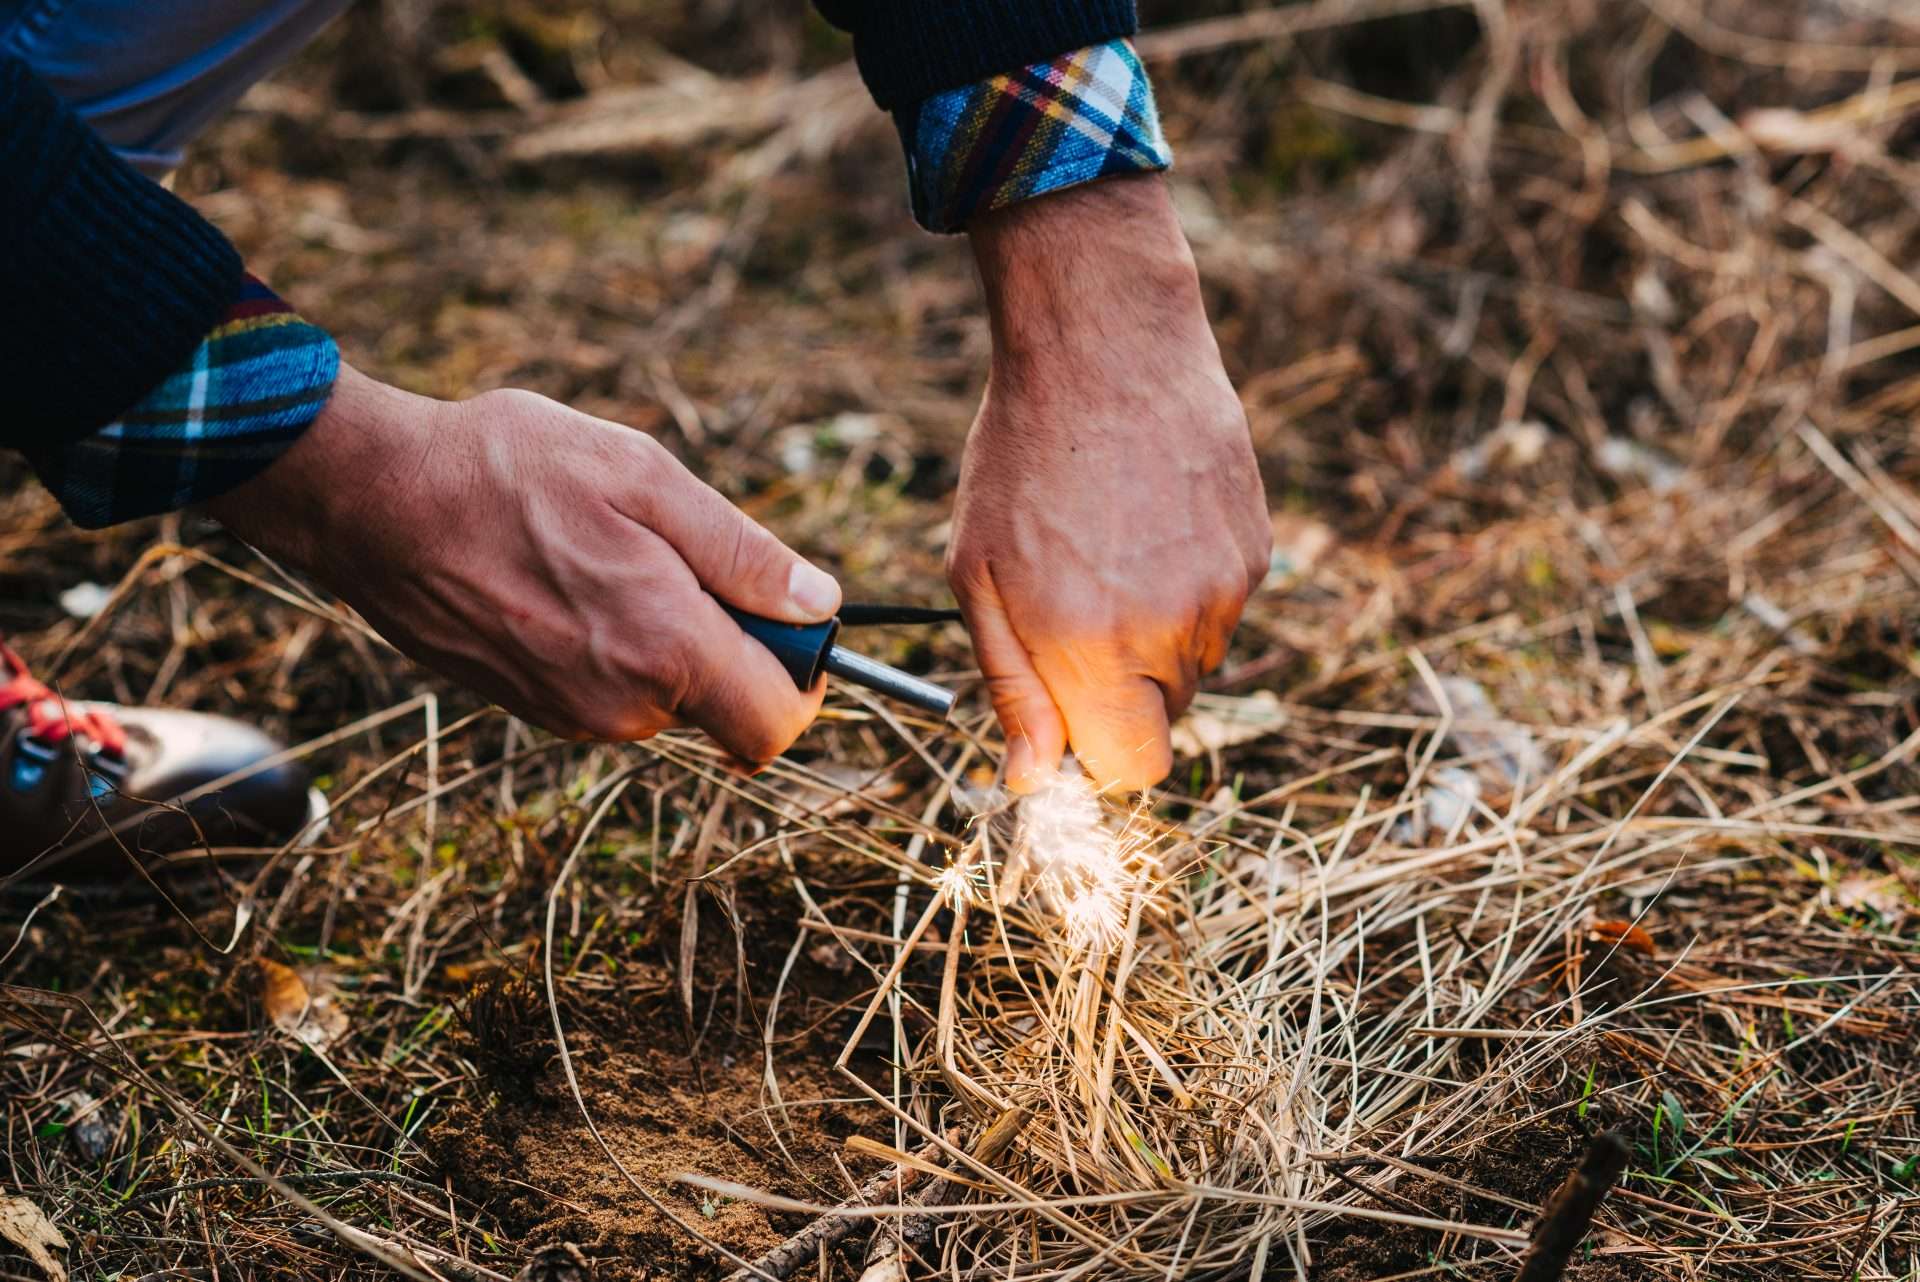 Man using flint and campfire starter to build a campfire